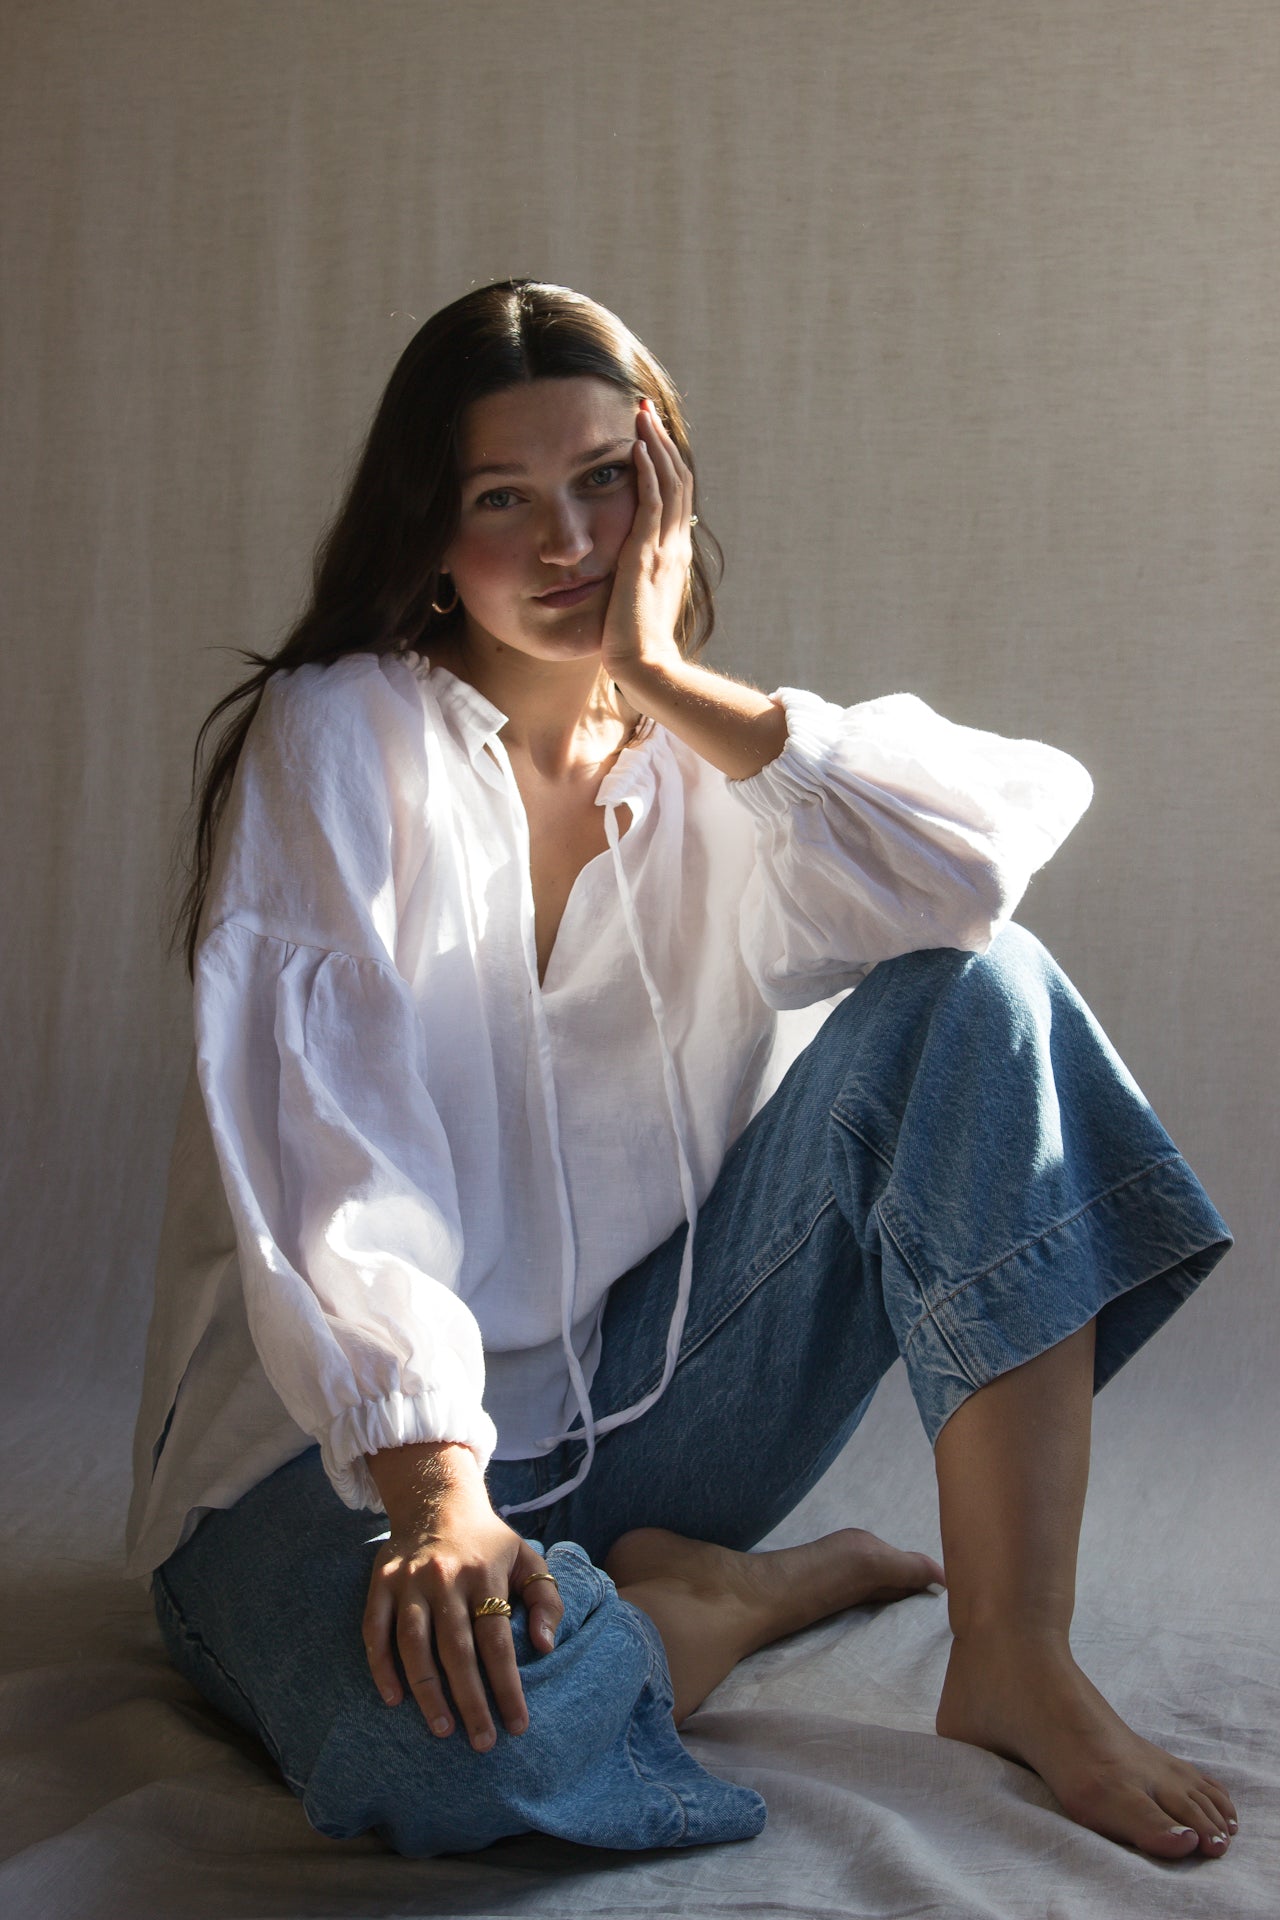 Evelyn Blouse in White